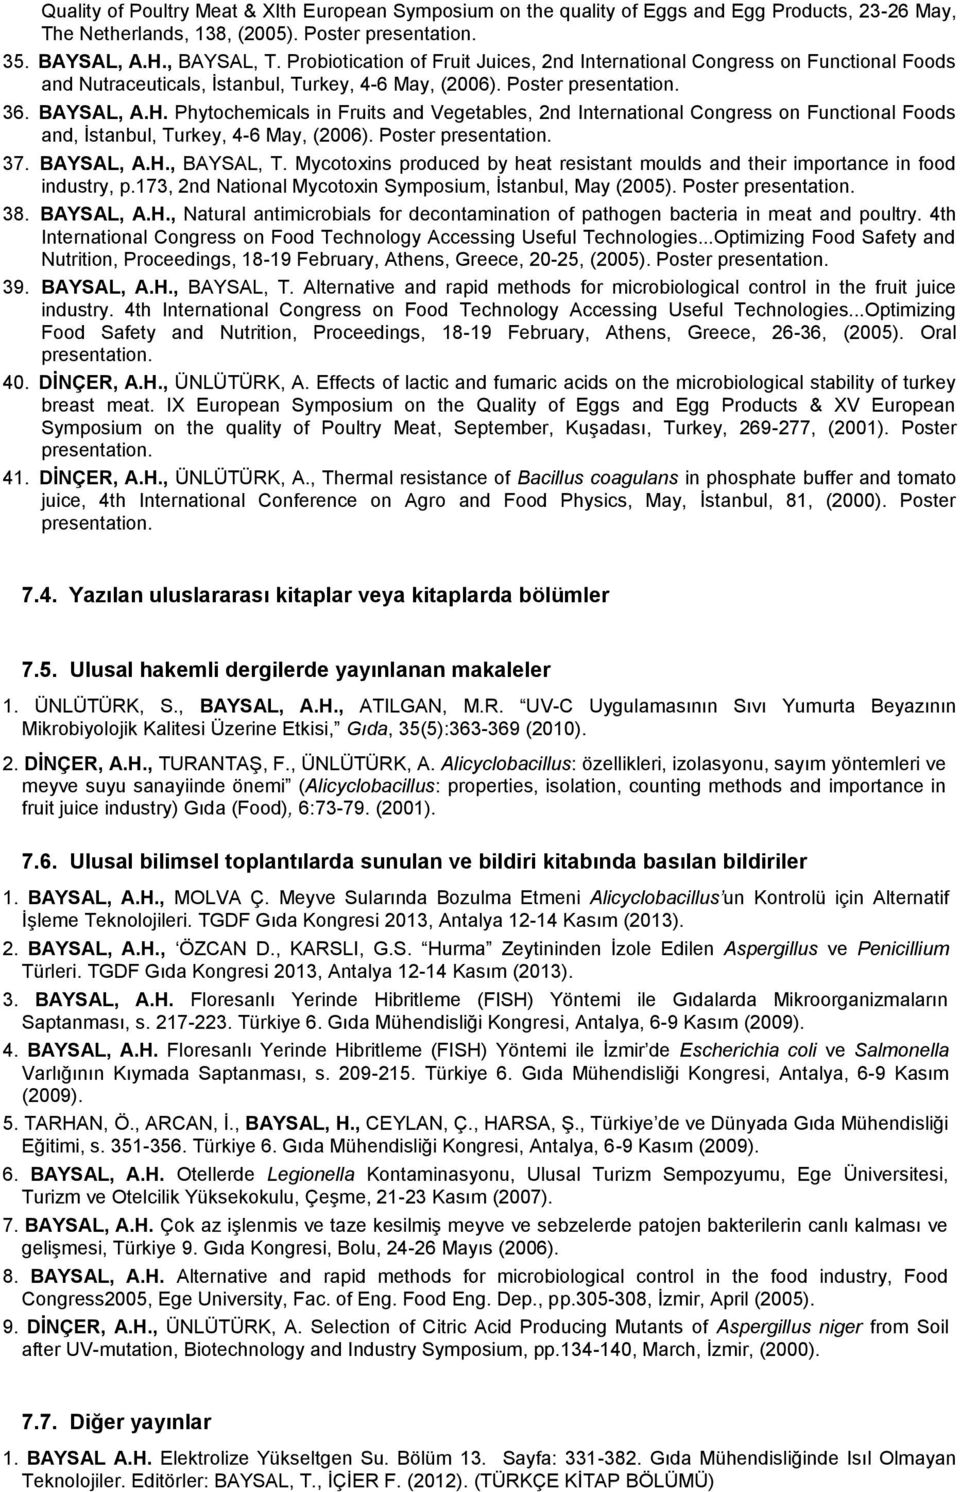 Phytochemicals in Fruits and Vegetables, 2nd International Congress on Functional Foods and, İstanbul, Turkey, 4-6 May, (2006). Poster 37. BAYSAL, A.H., BAYSAL, T.